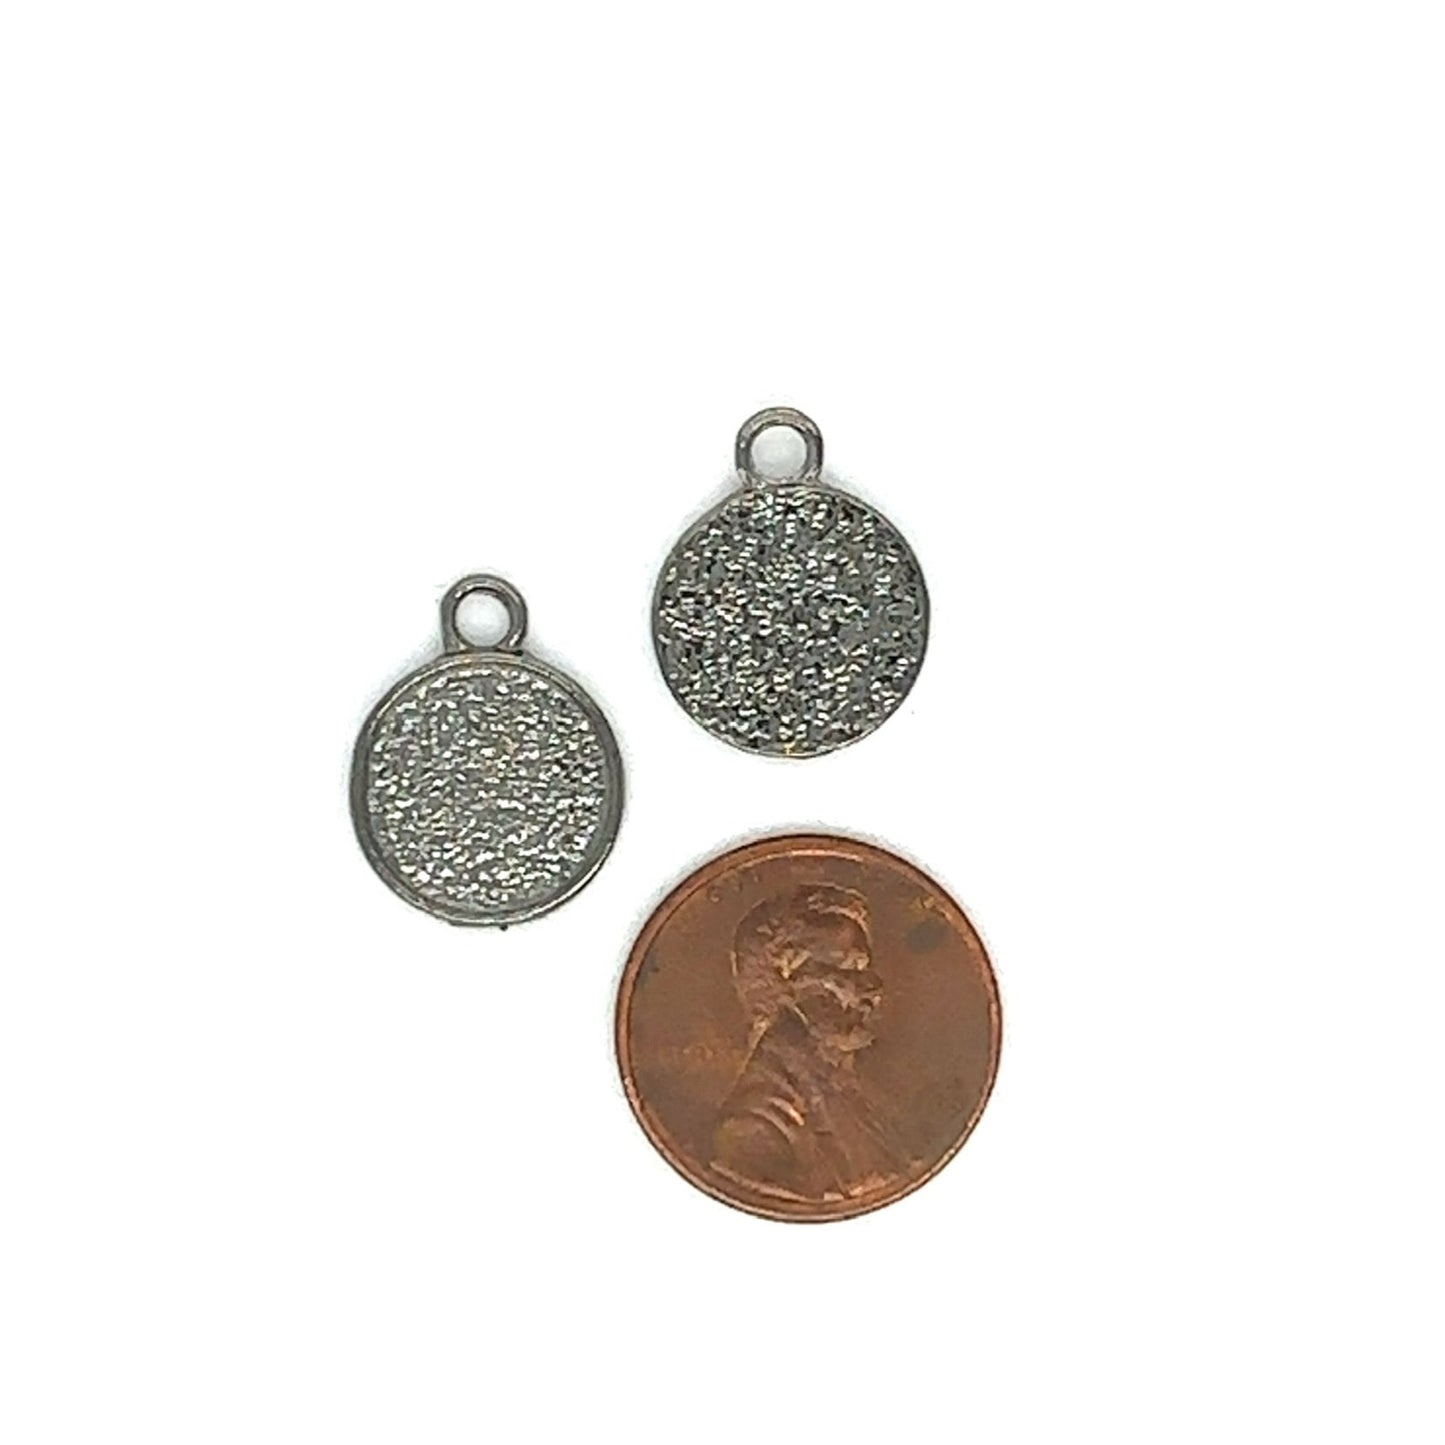 12mm Small Round Bezel Pendant Blank with Top Loop